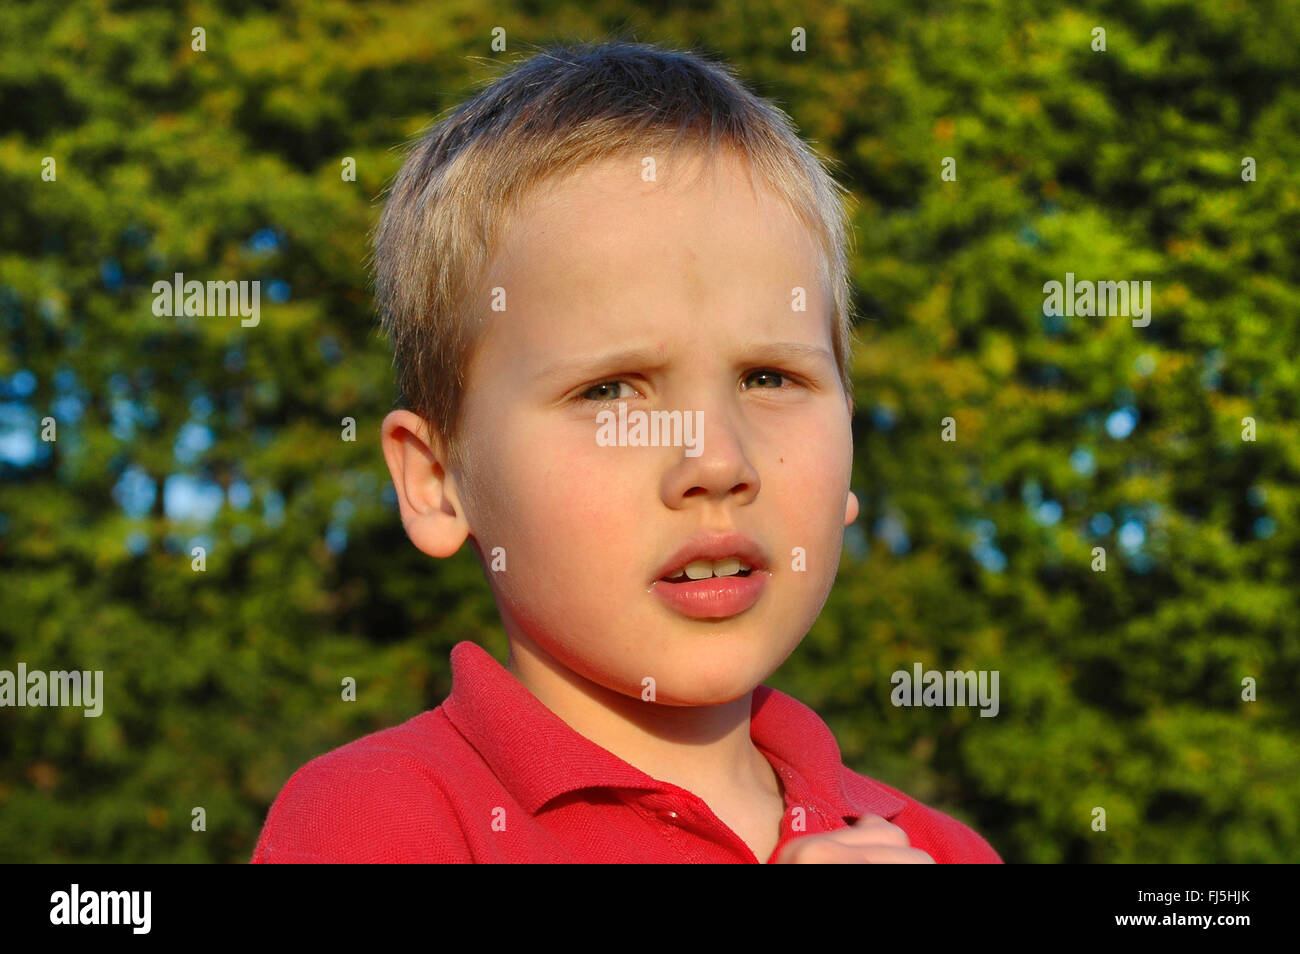 eight years old boy, portrait of a child Stock Photo